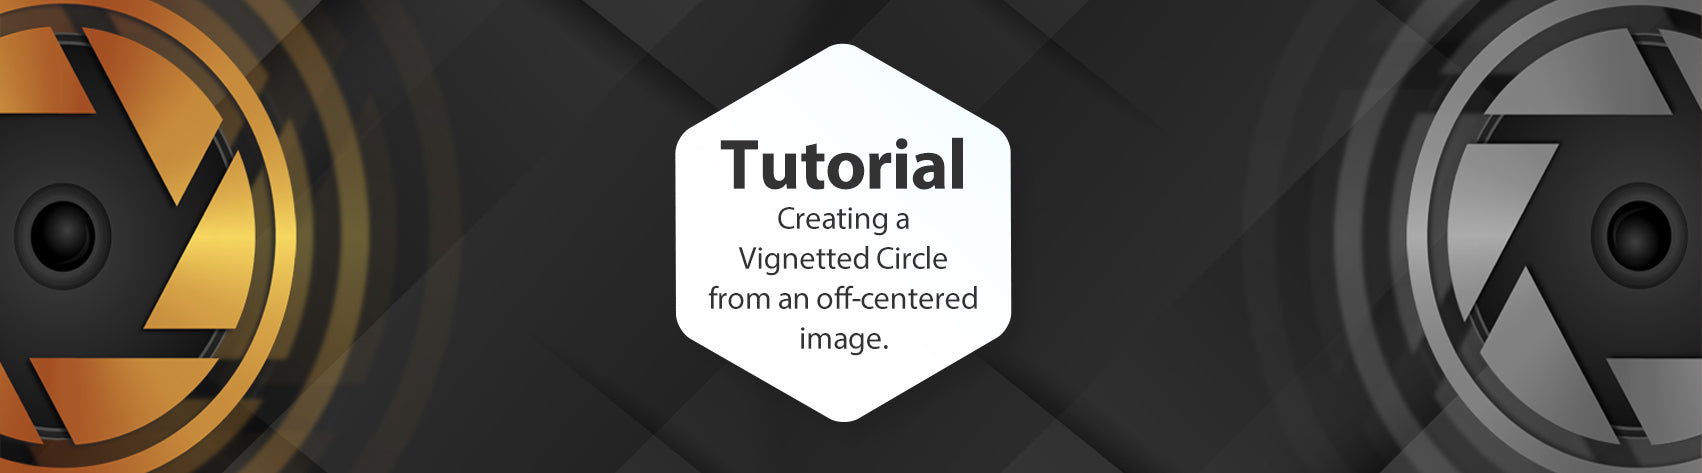 Tutorial - Creating a Vignetted Circle from an off-centered image